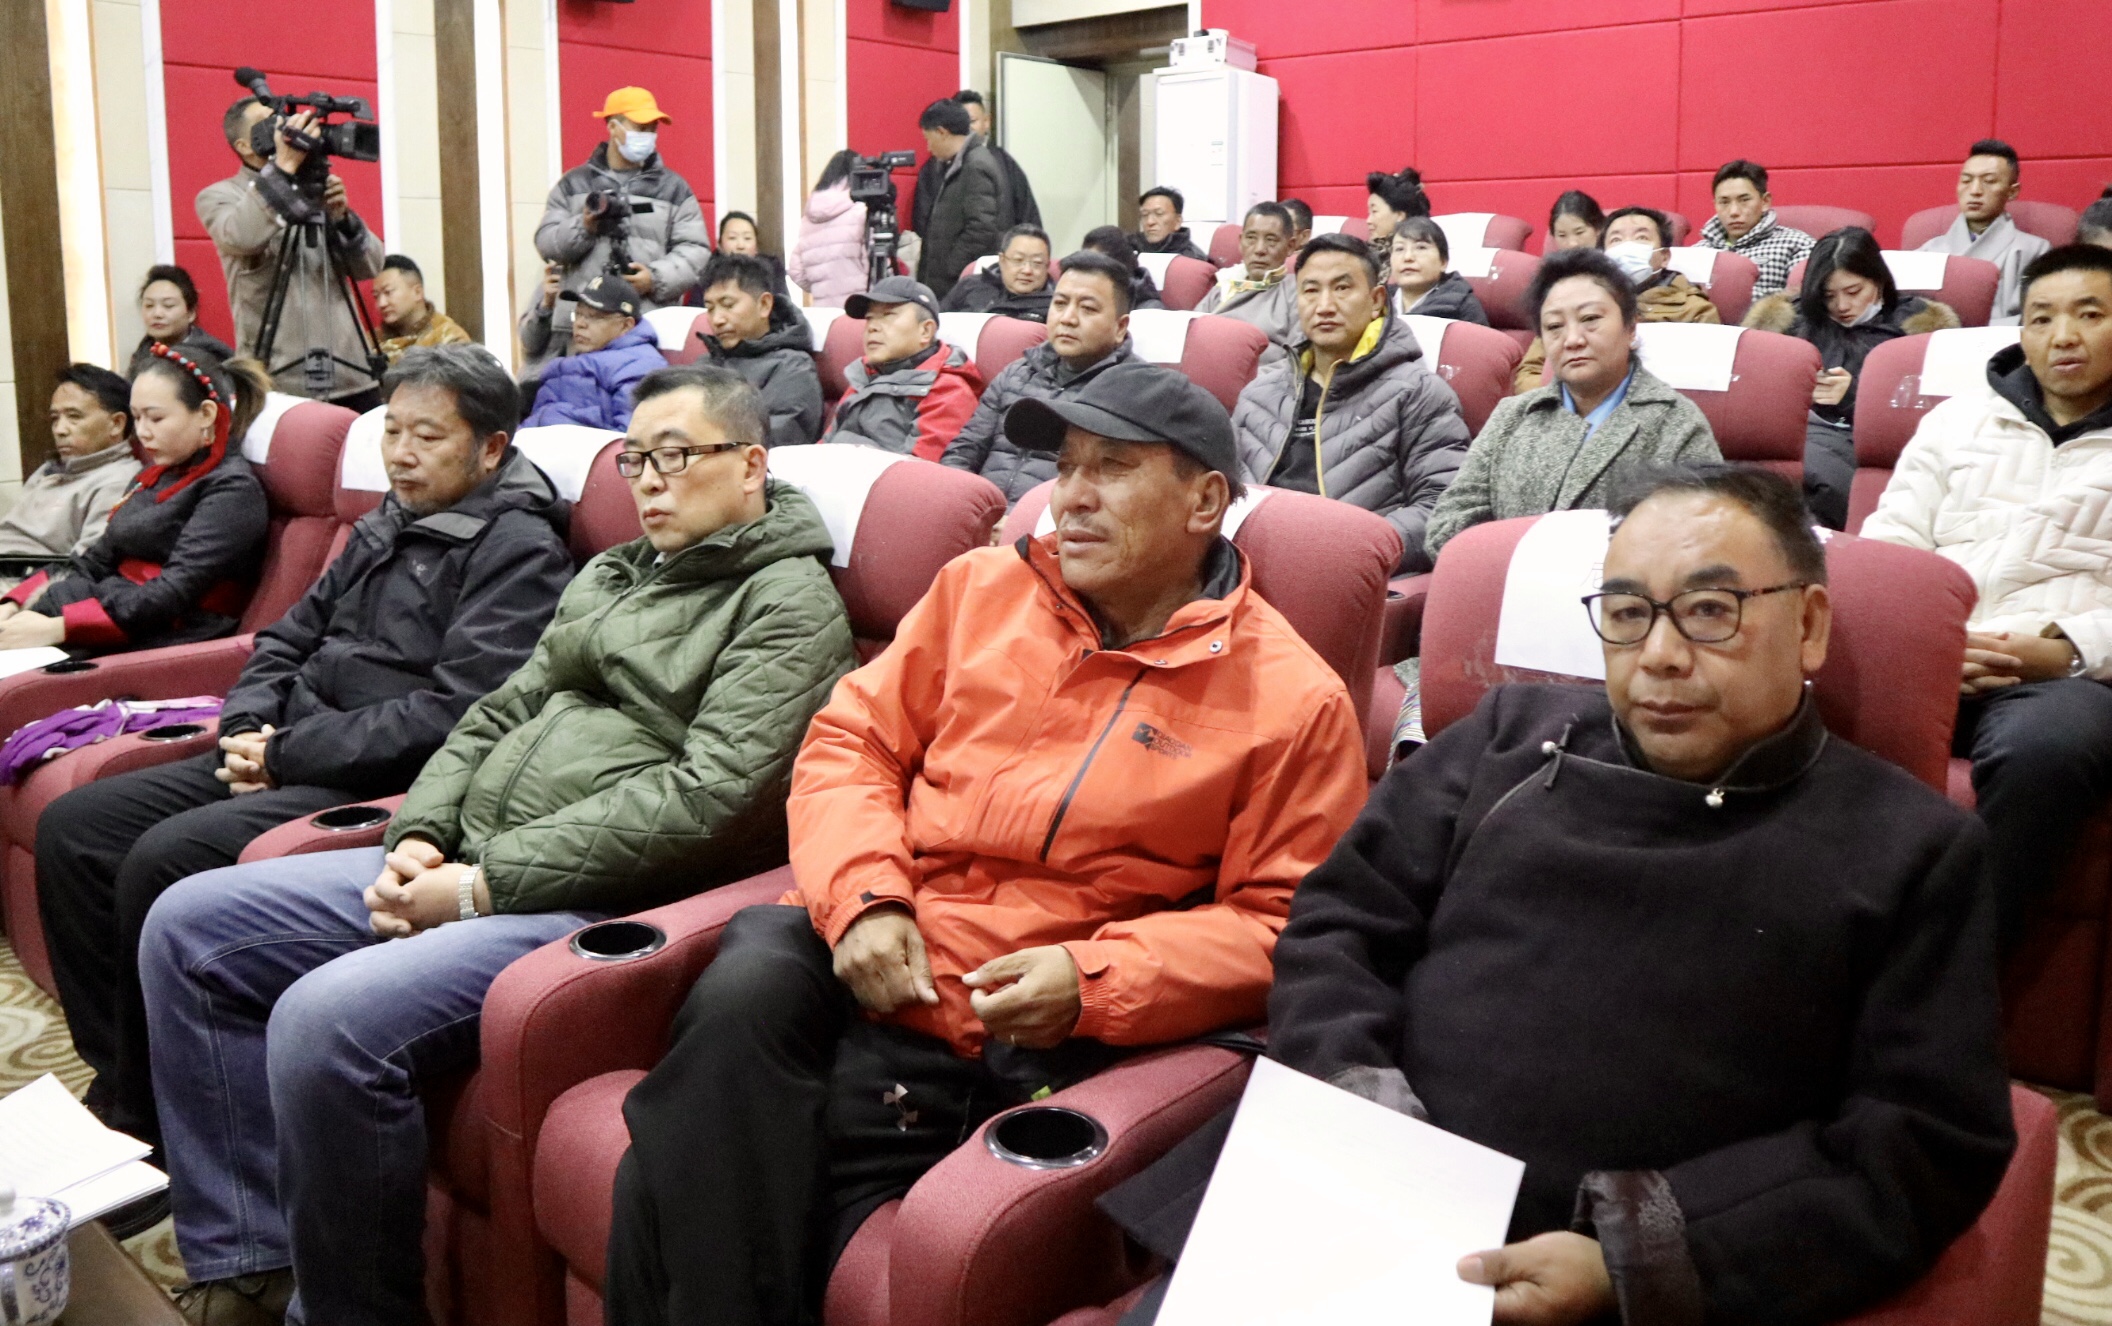 Movies get a touch of Tibetan language